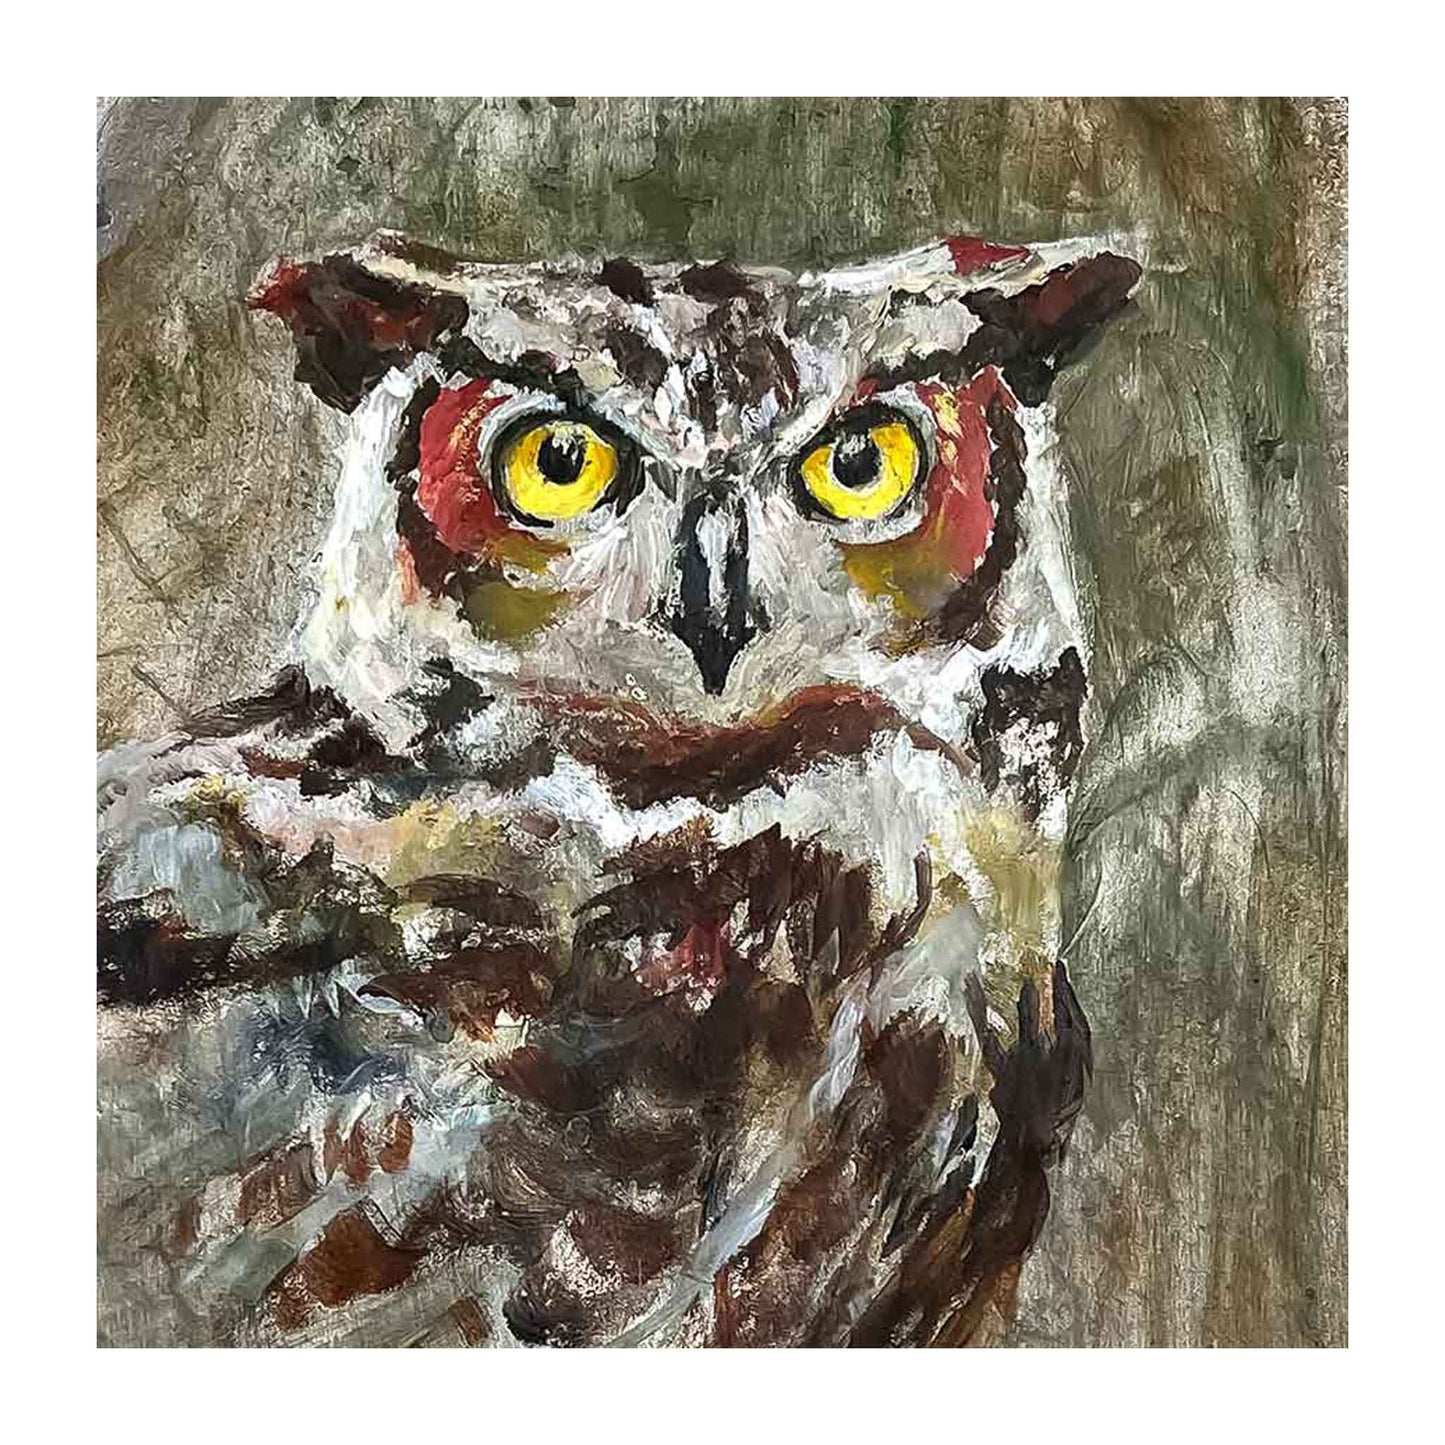 JRO Owl Staring You Down Original Painting by Becky Owen. Original painting crafted on a vintage metal roof shingle from a church in Deland, Florida. Acrylic painting of an intense owl with piercing yellow eyes staring at you. Painted in Earth tone colors.